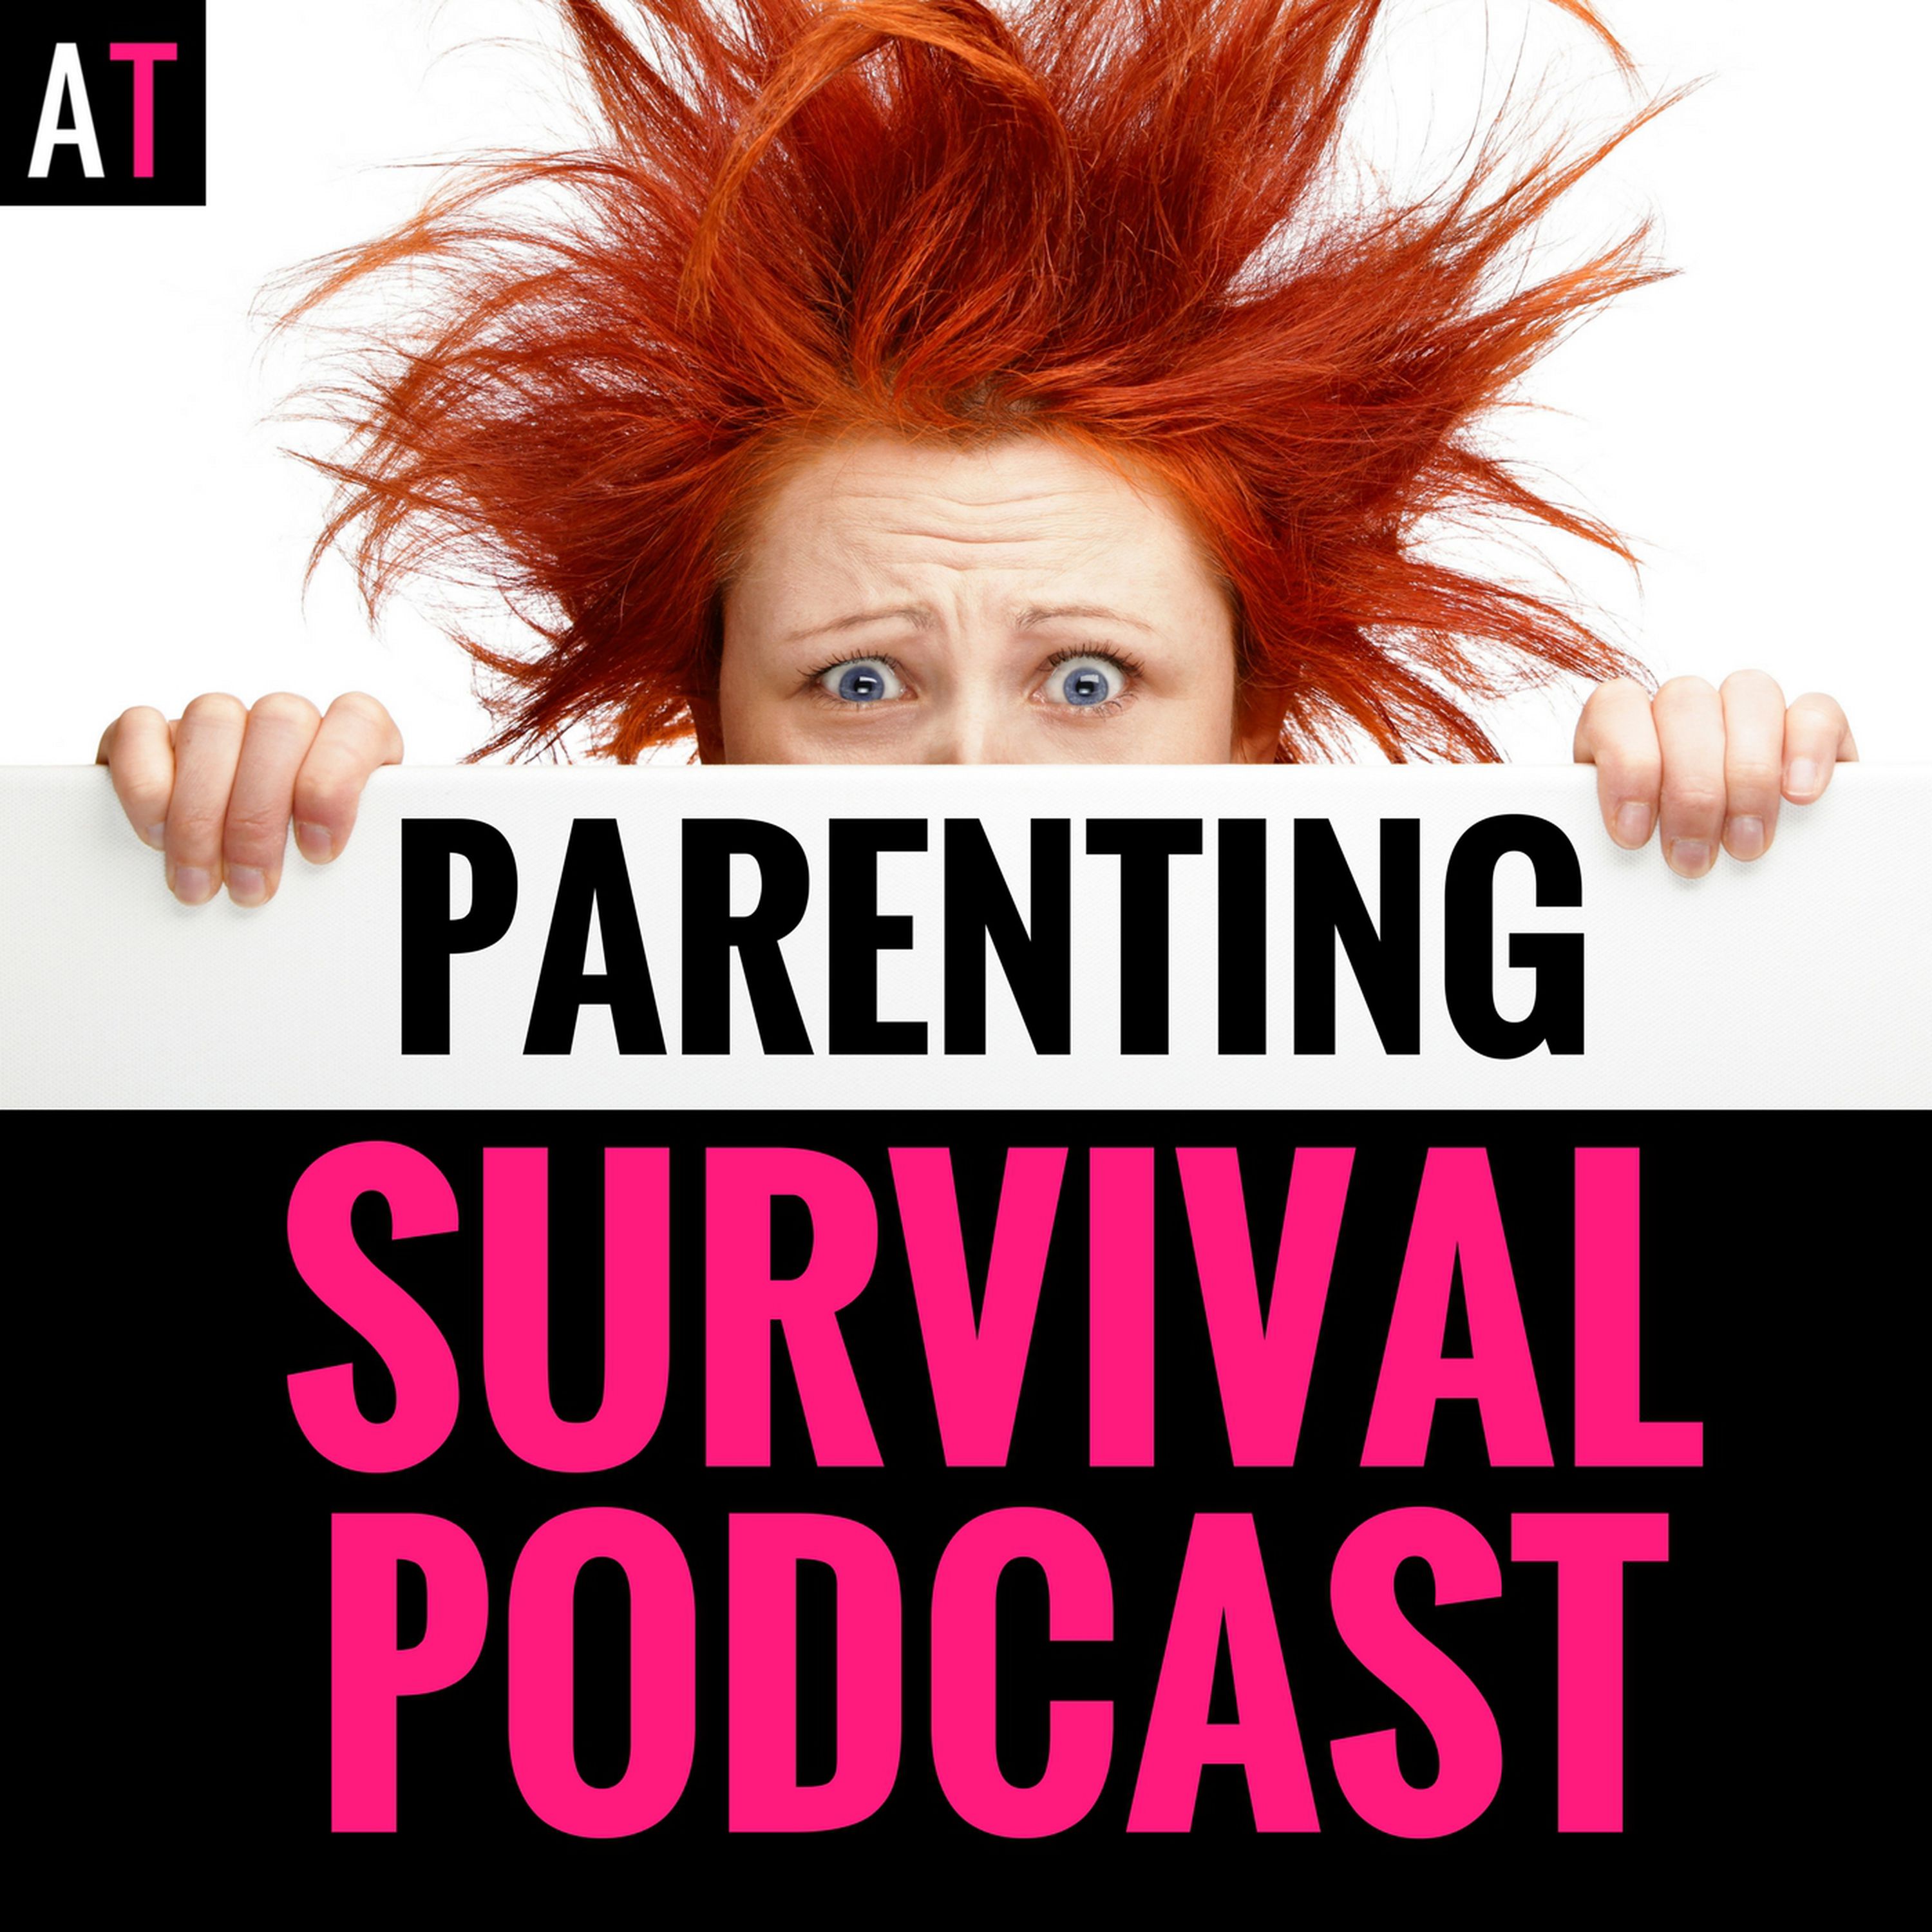 PSP 027: Why Reassurance Doesn’t Help Children with Anxiety and OCD